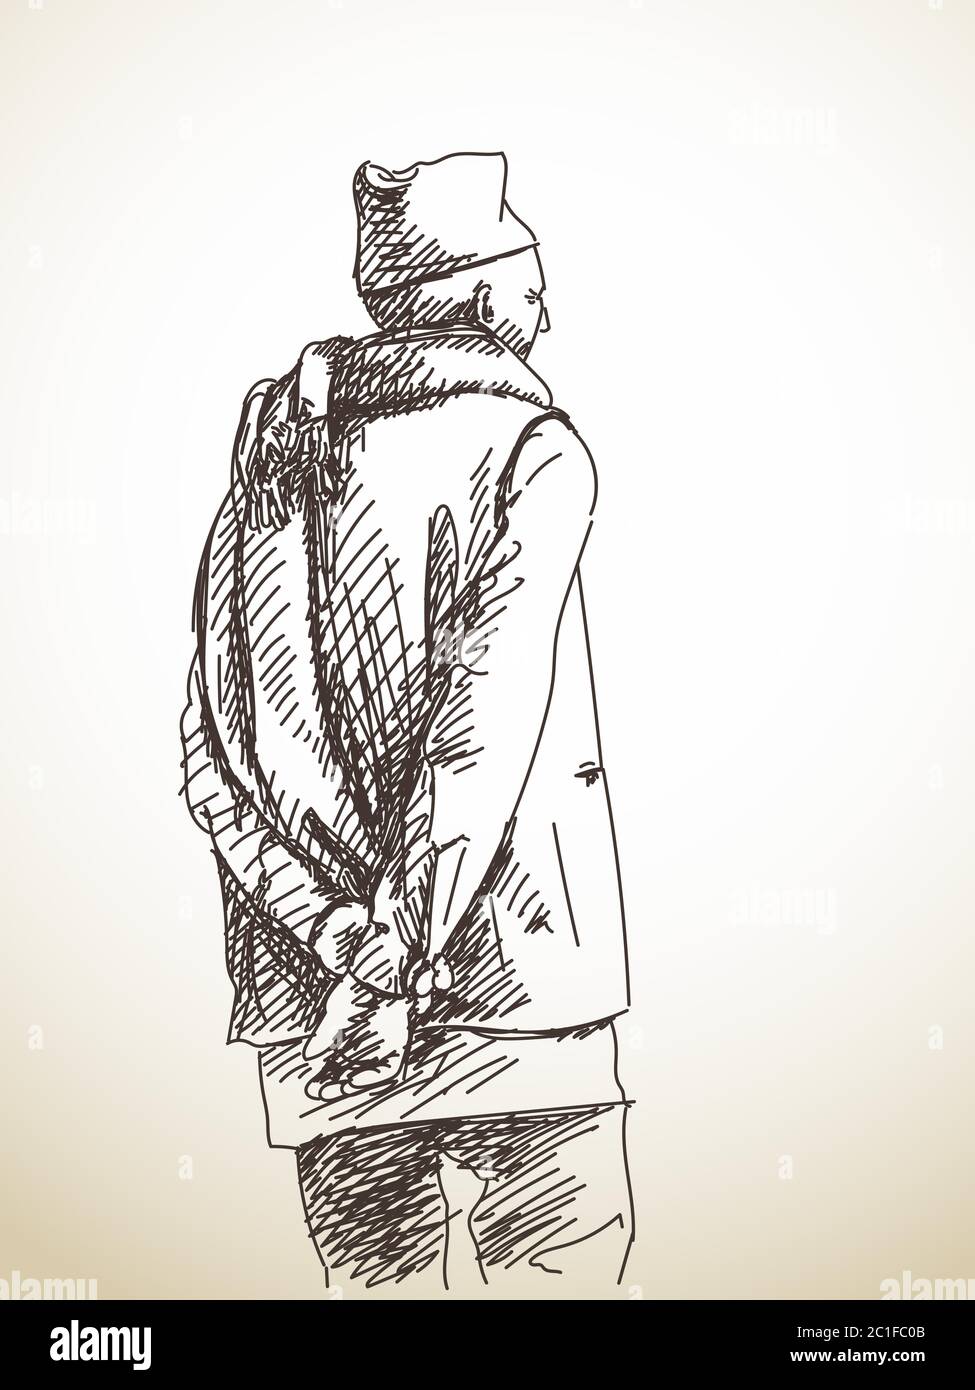 Sketch of nepali man from back with scarf around his neck, Hand drawn ...